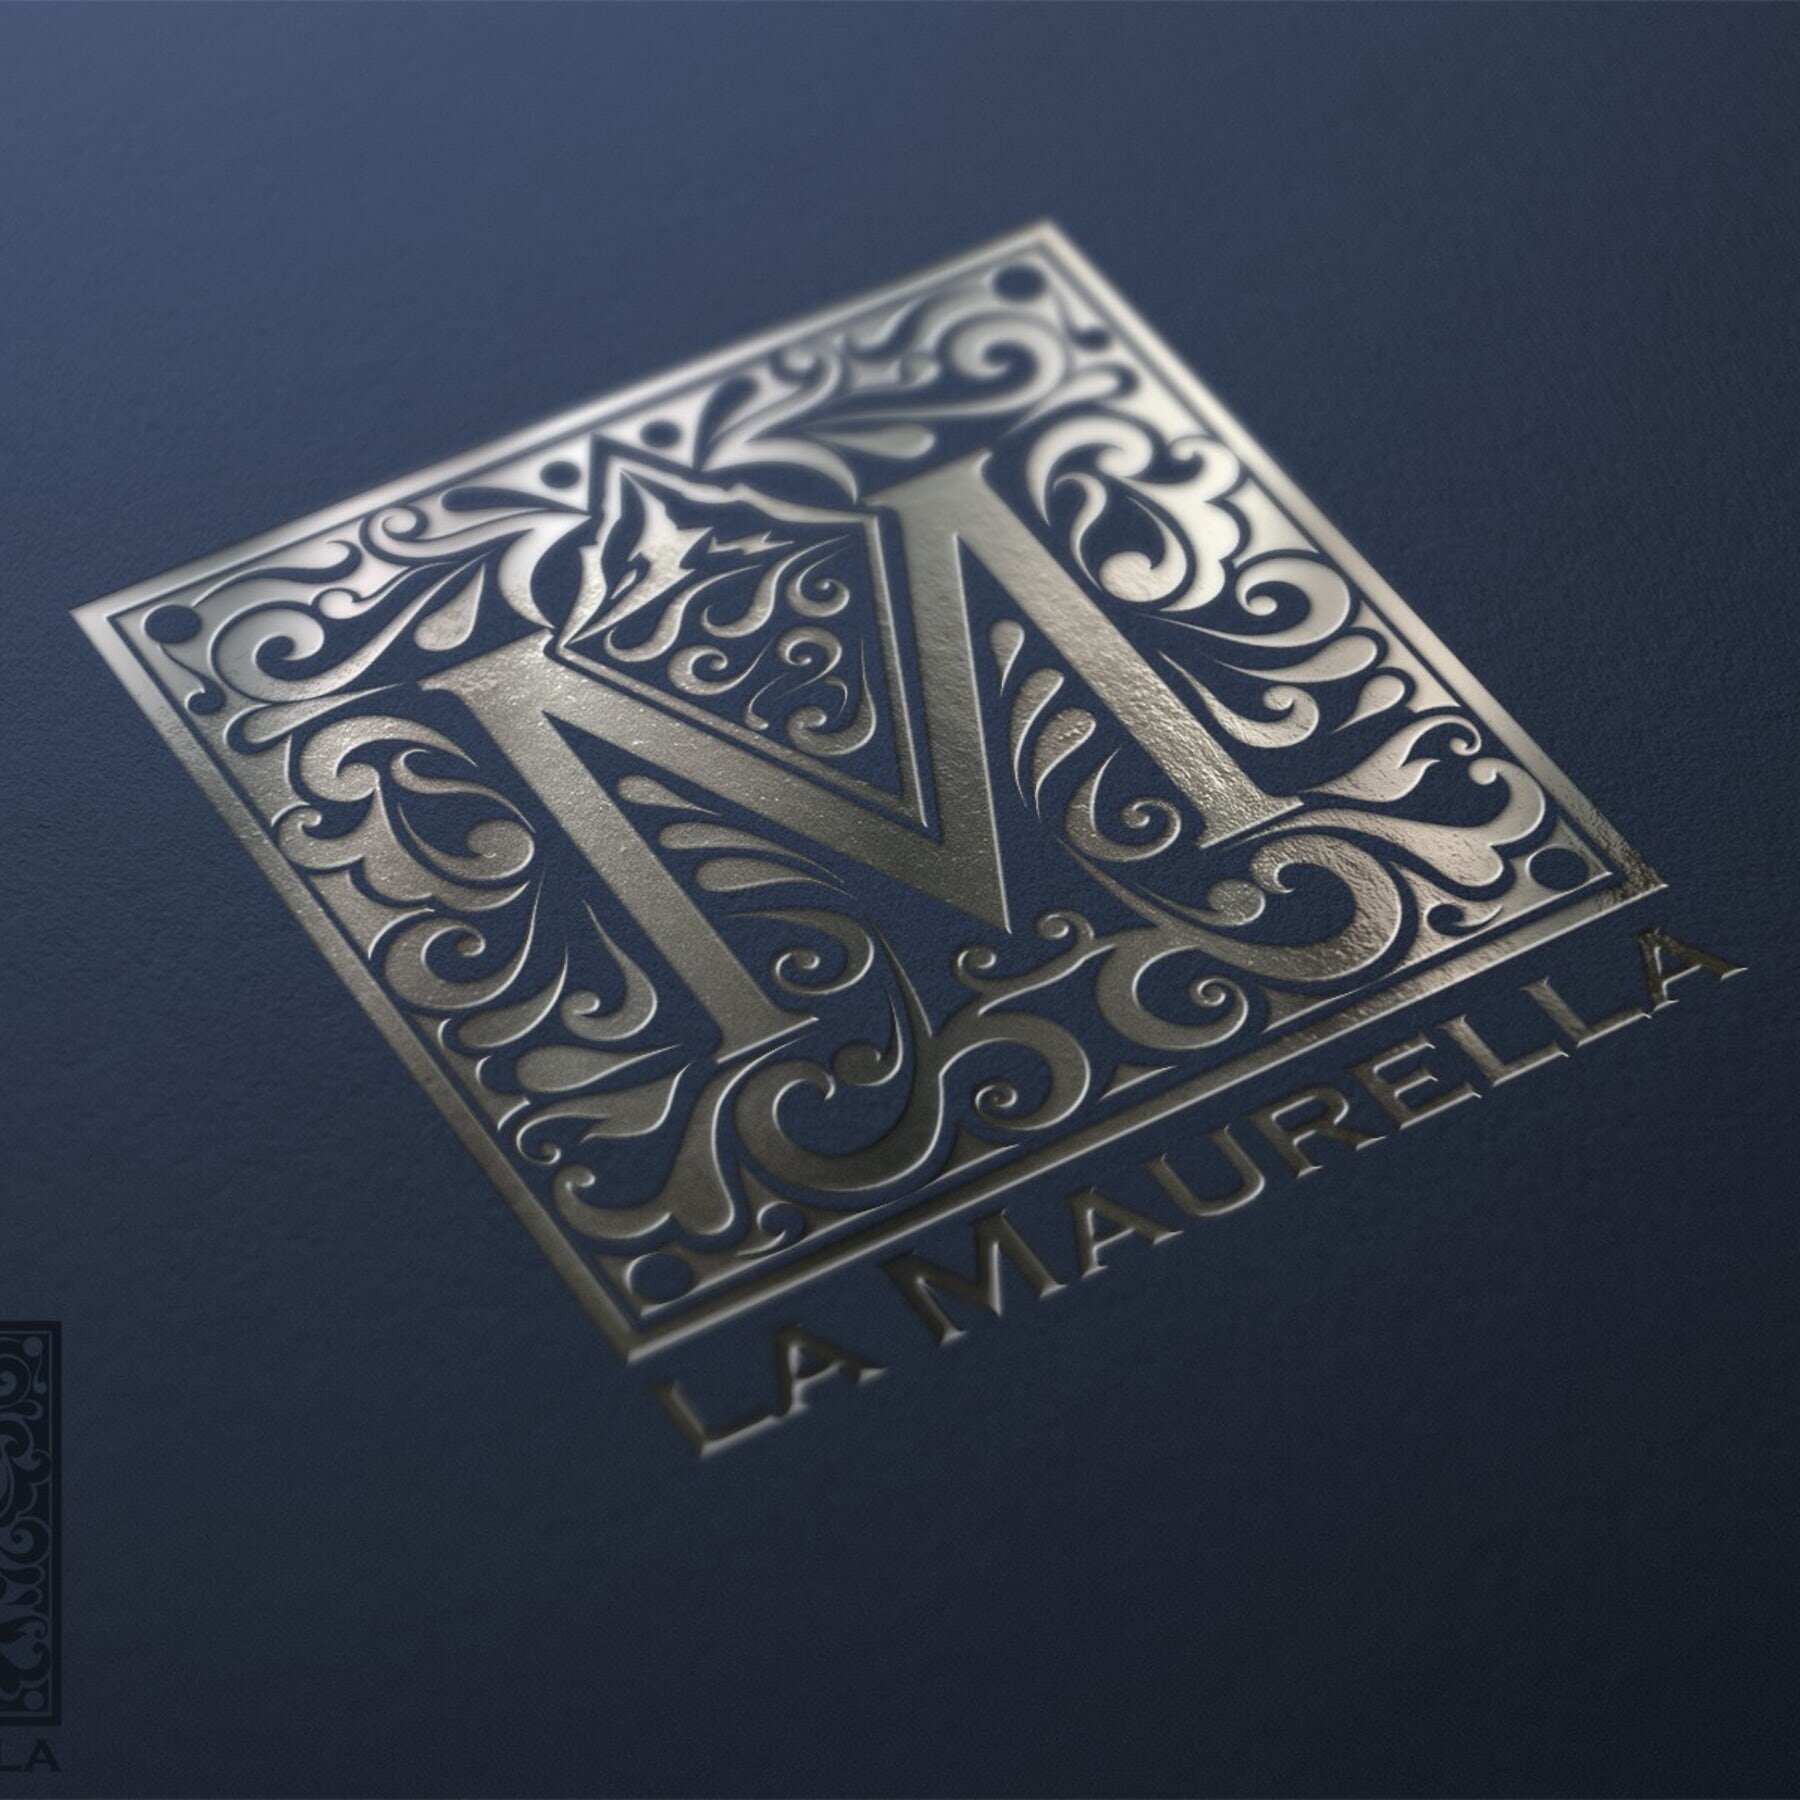 Shiny metals, metallic materials in graphic design are ultra trendy for branding identity and product design. in combination with engraving to enhance effect.